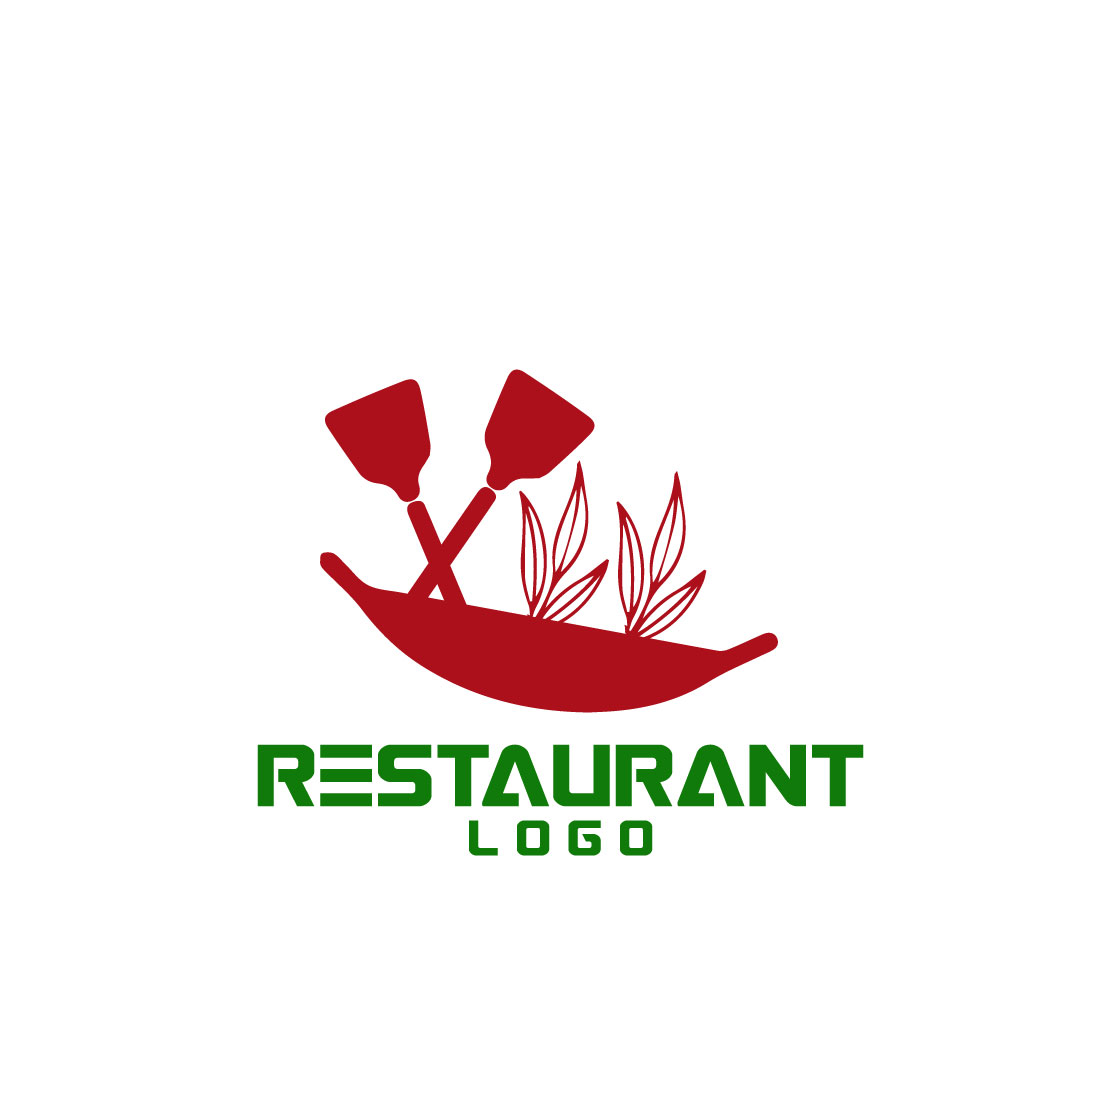 Free Culinary Creations logo preview image.